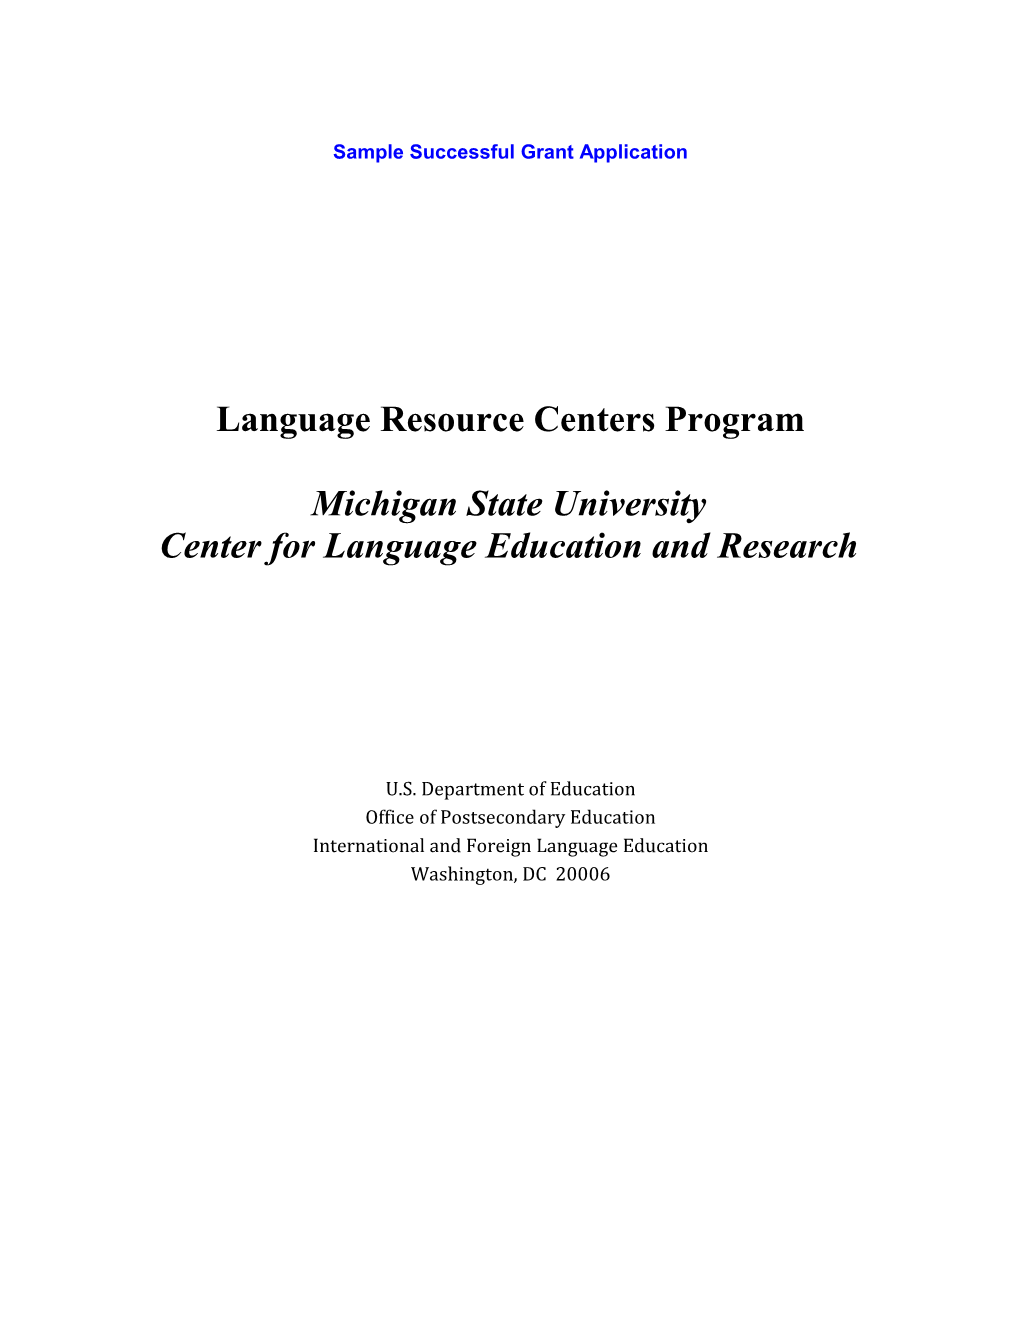 Sample Successful Grant Application for Michigan State University Under the Language Resource